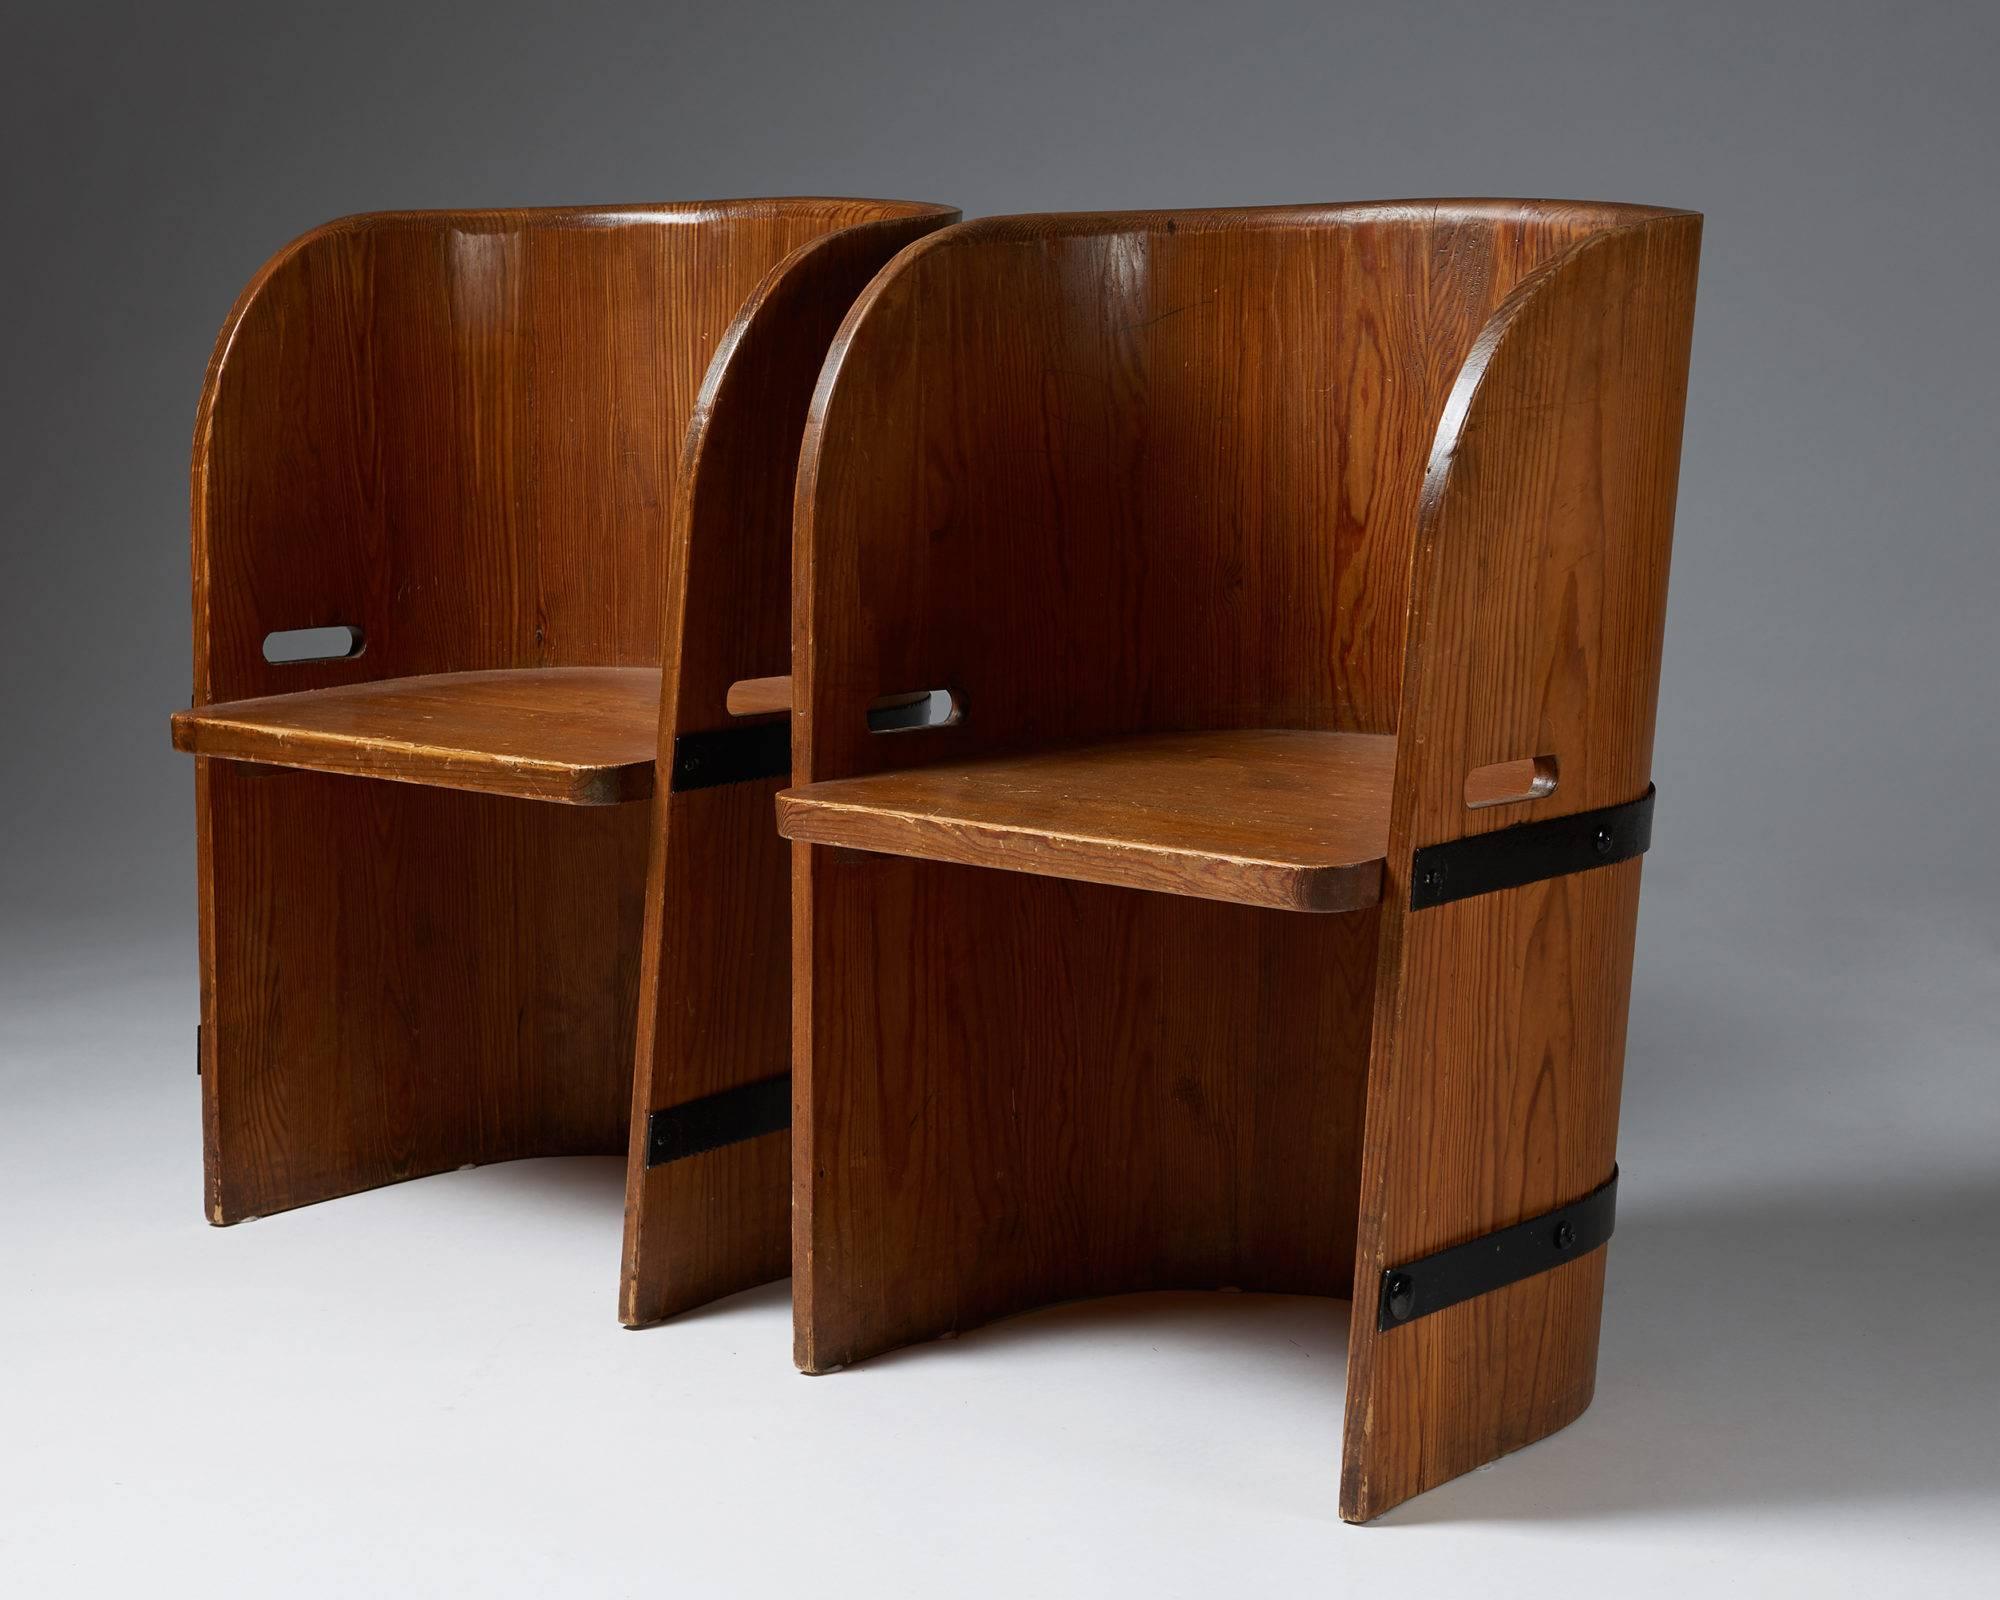 Pair of armchairs anonymous, Sweden, 1940s.
Solid pine and iron.

H: 76 cm/ 30''
W: 54 cm/ 21 1/4''
D: 44 cm/ 17 1/4''
Seat height: 39.5 cm/ 15 1/2''.